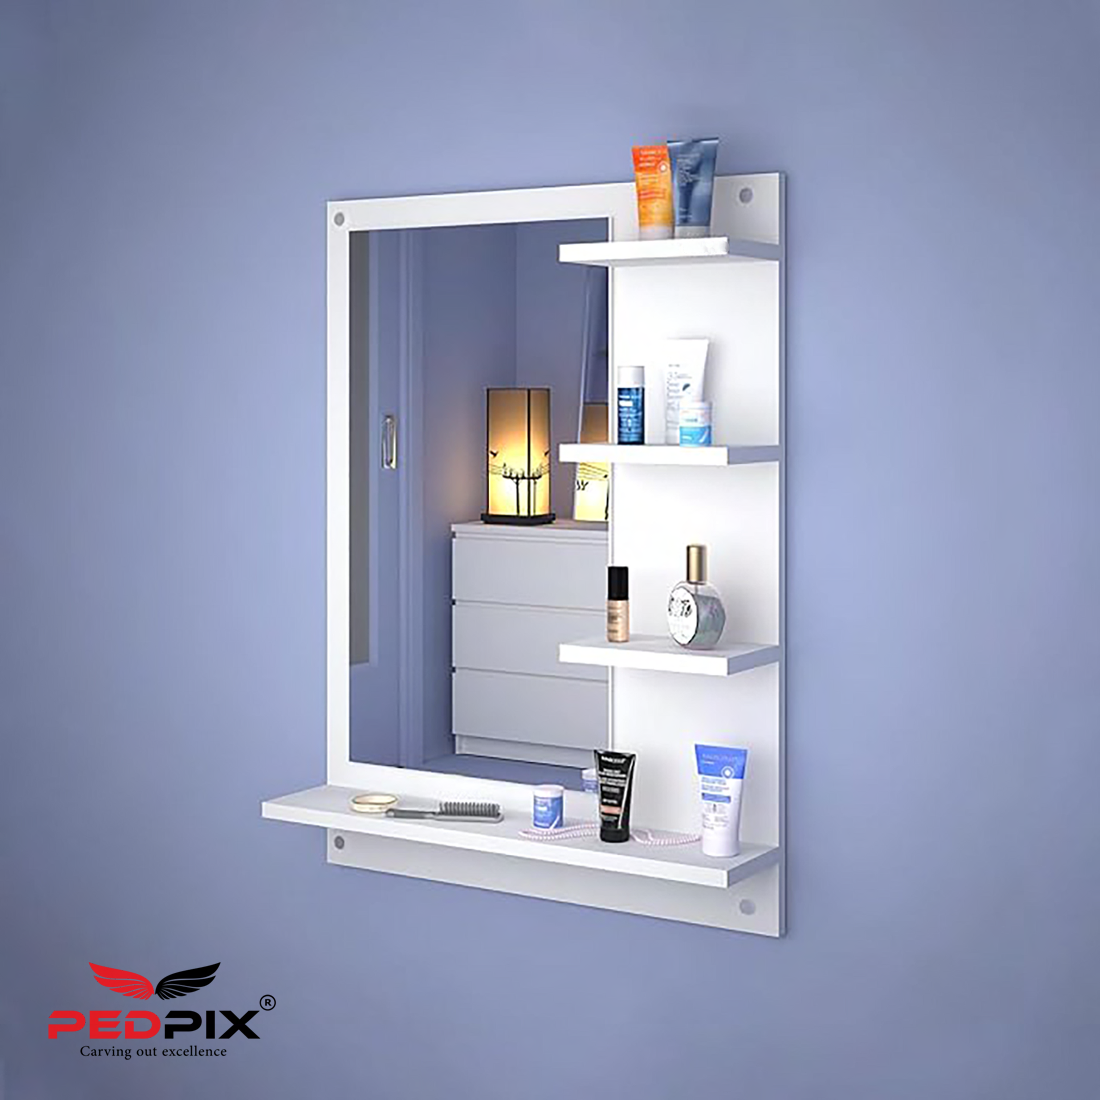 PEDPIX Wall Mirrors with Shelf: Decorative Wall Hanging Dressing Table for Bedroom and Living Room Wall Mounted Engineered Wood Dressing Table(Finish Color -, White, DIY(Do-It-Yourself))